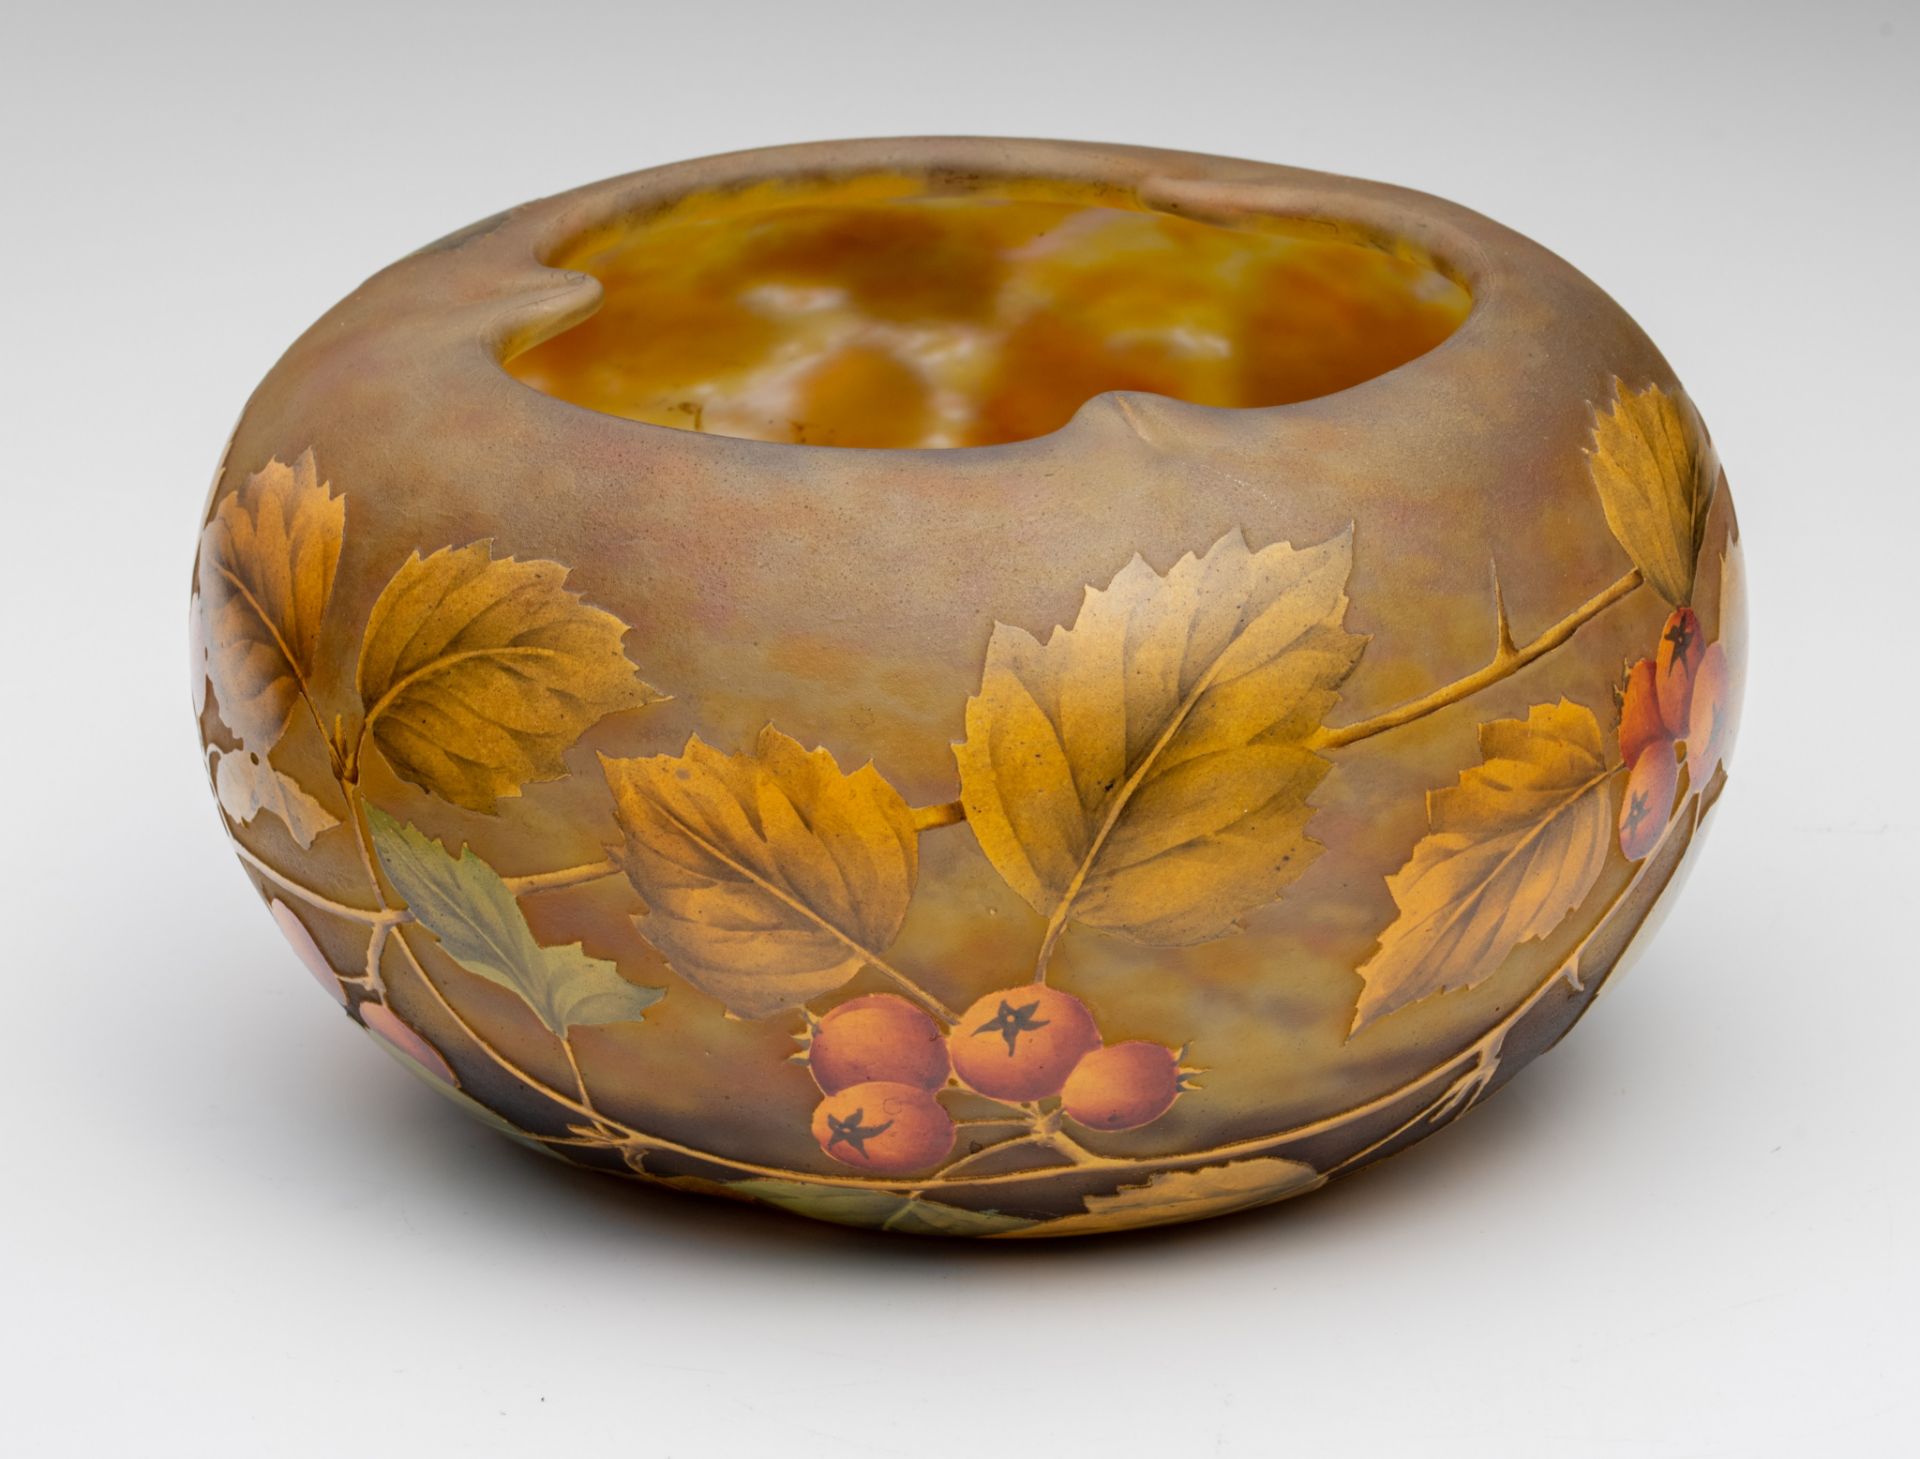 (BIDDING ONLY ON CARLOBONTE.BE) A large Art Nouveau style cameo glass paste bowl with floral decorat - Image 5 of 10